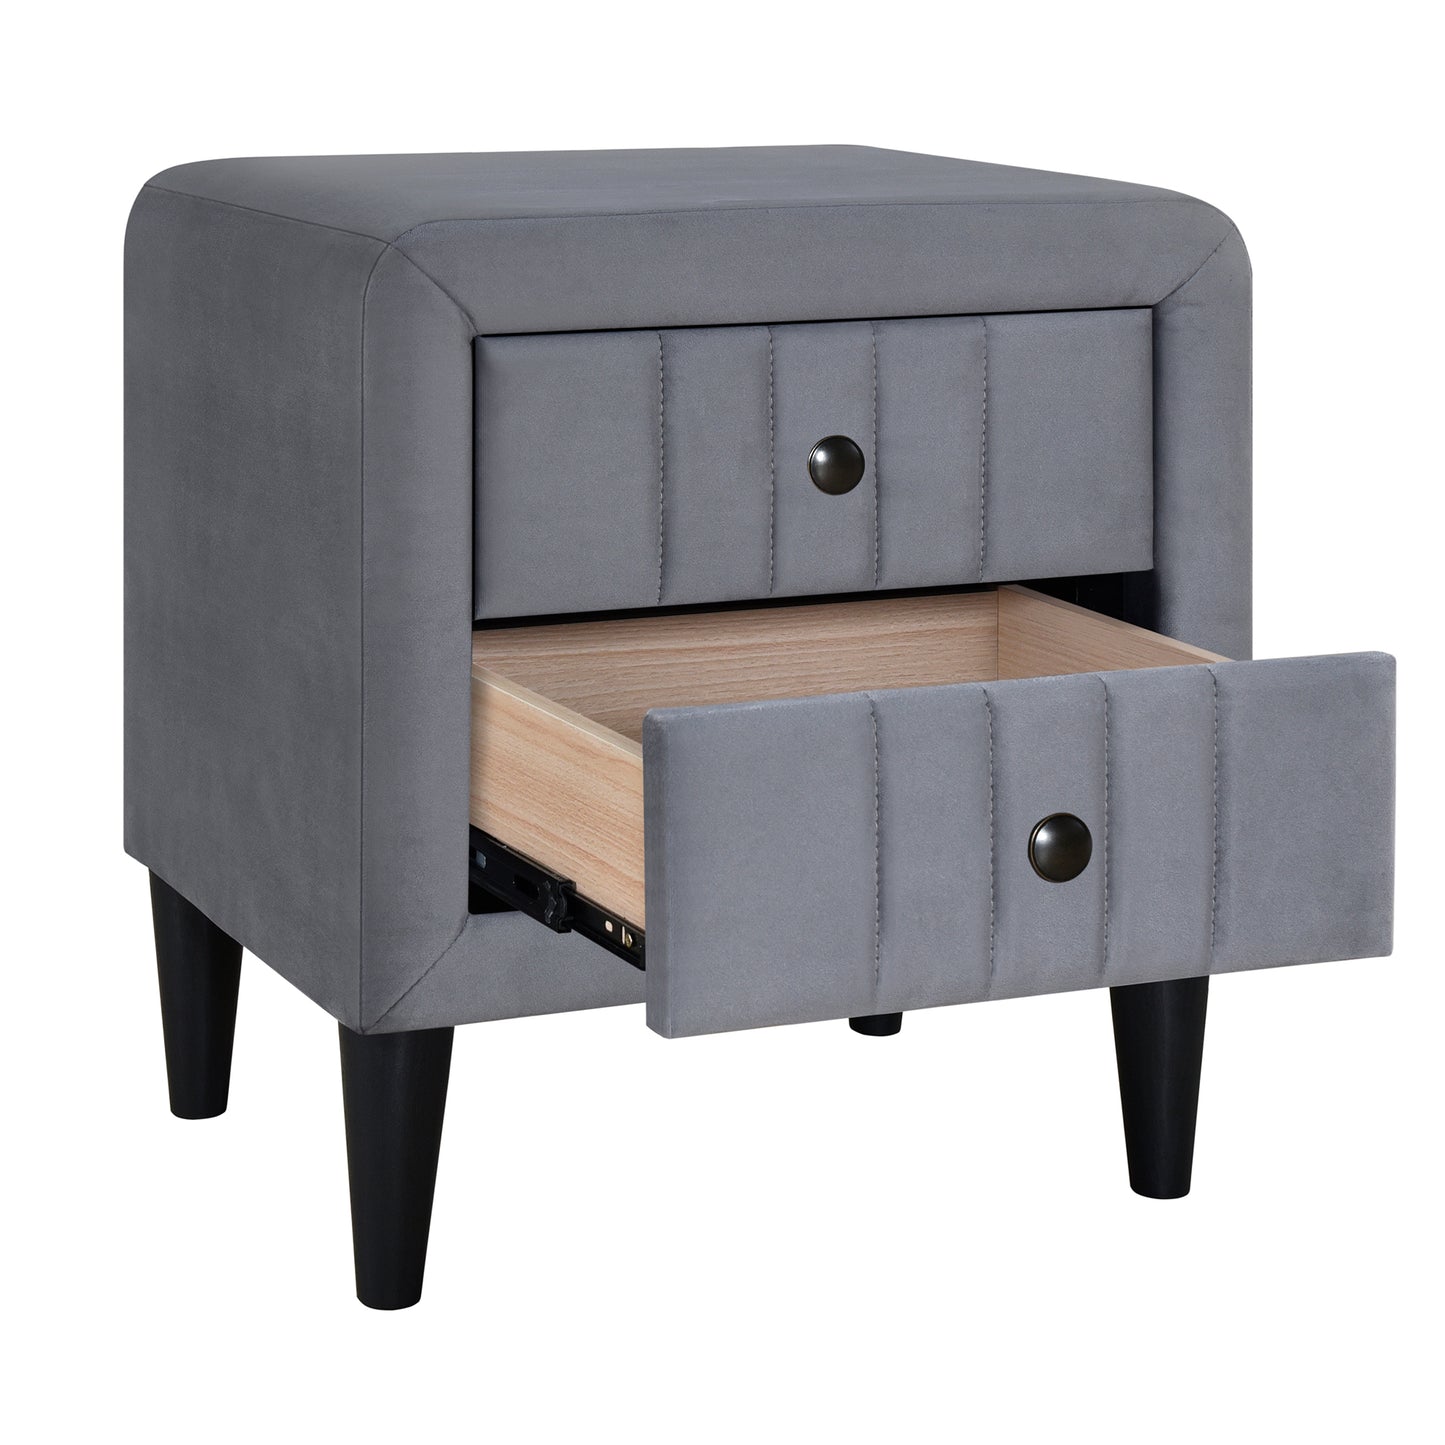 Upholstered Wooden Nightstand with 2 Drawers,Fully Assembled Except Legs and Handles,Velvet Bedside Table-Gray